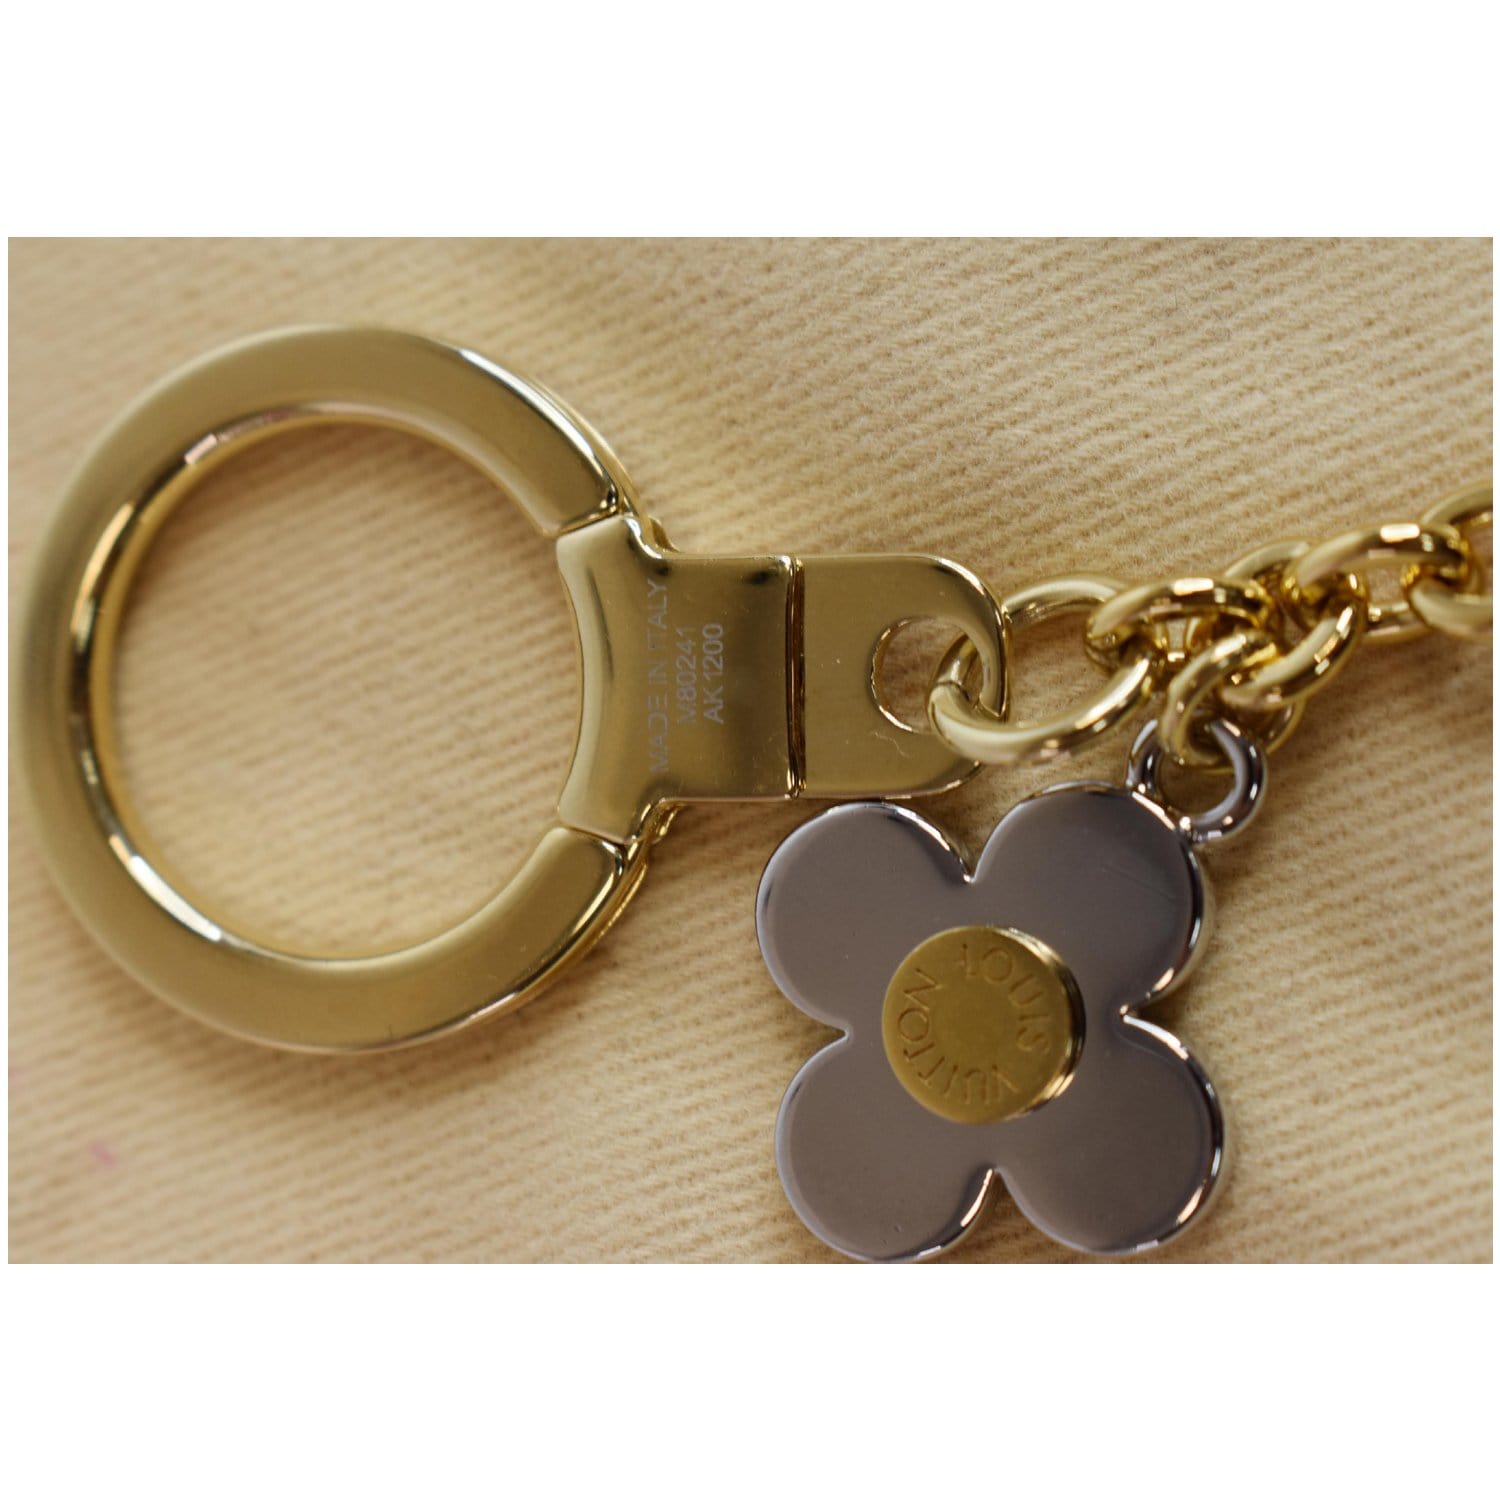 LV Blooming Flowers Chain Bag Charm and Key Holder